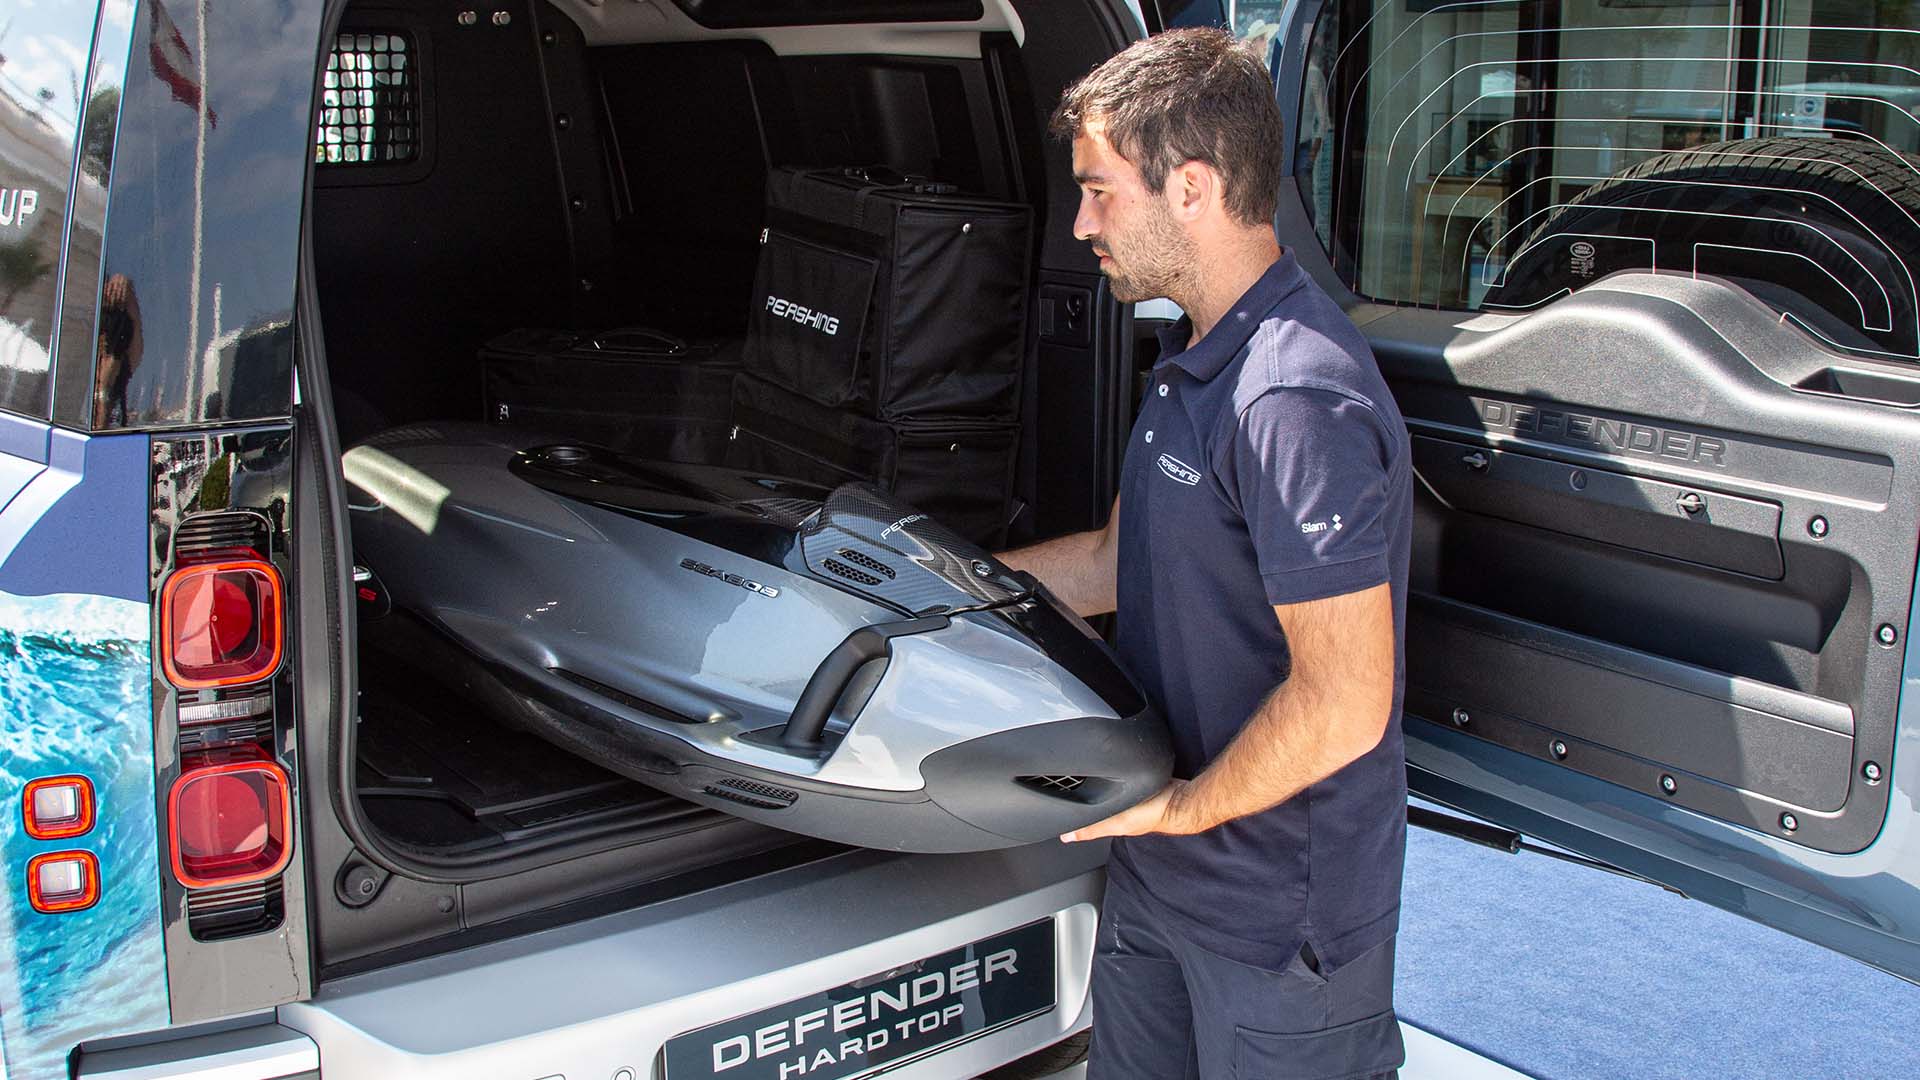 Ferretti Group Mobile Lab - Land Rover Defender forWorks | Land Rover IT